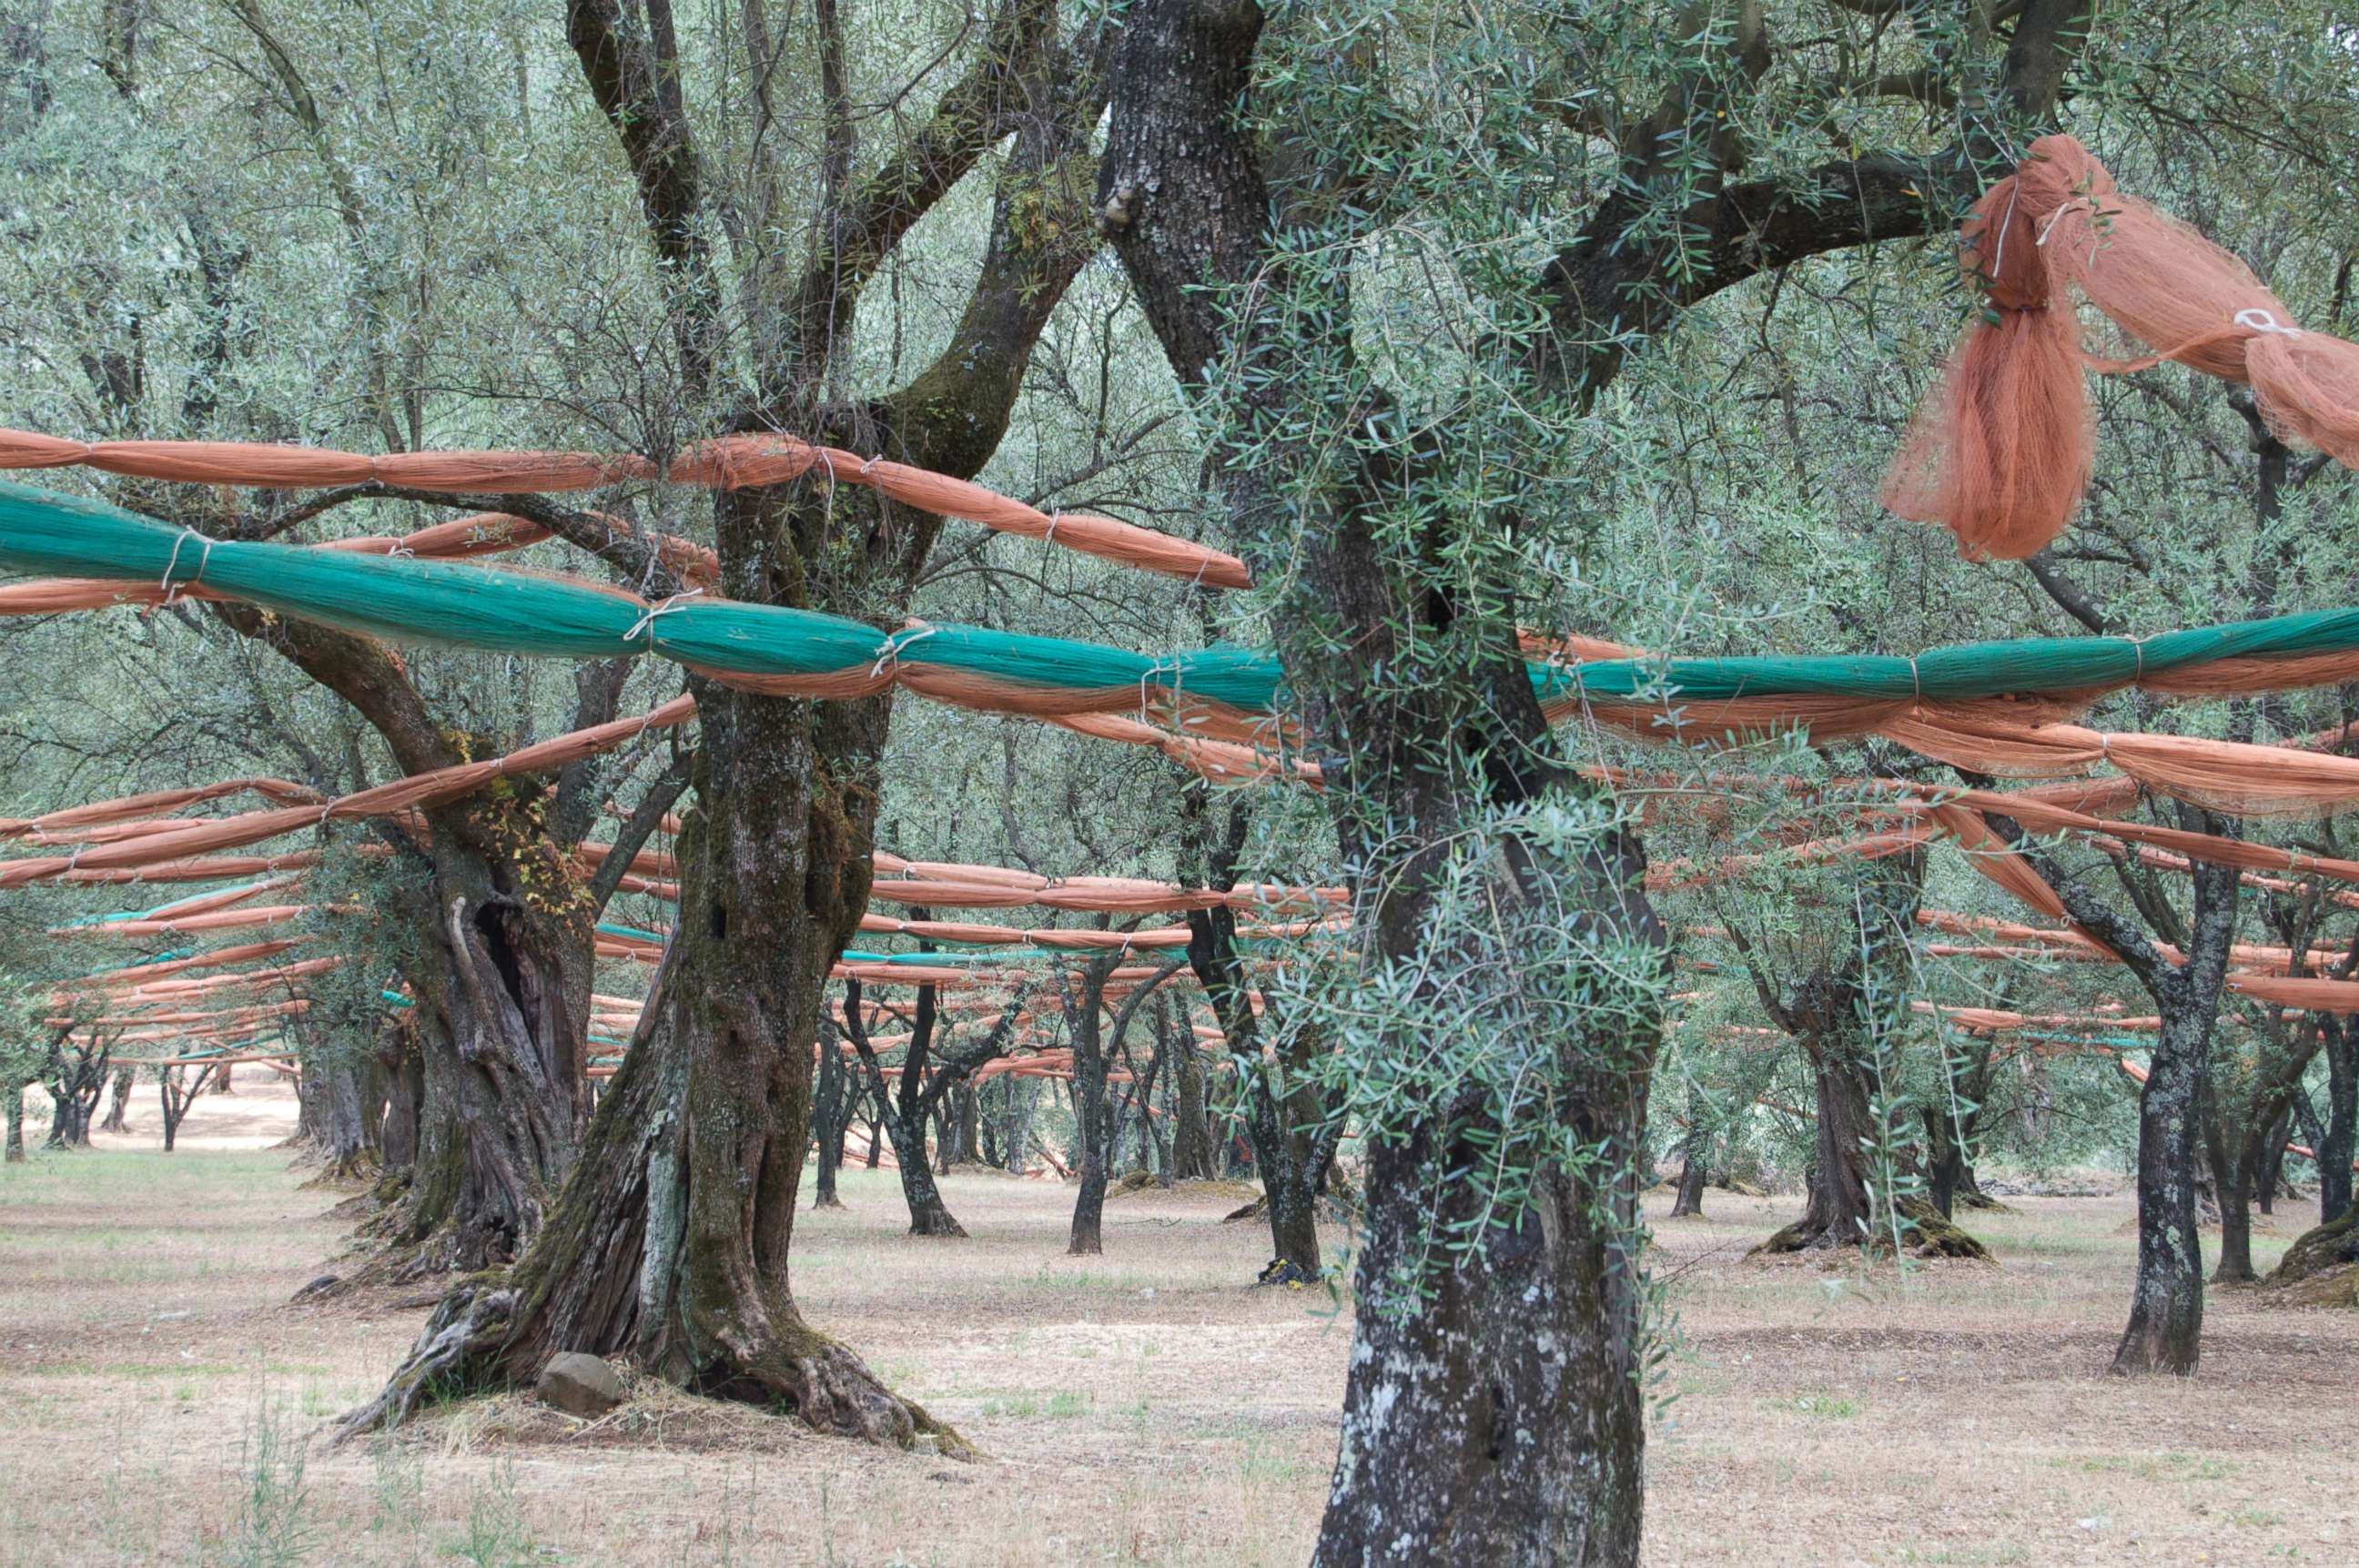 PHOTO: Olive trees are strung with netting in Calabria, Italy, August 2012.